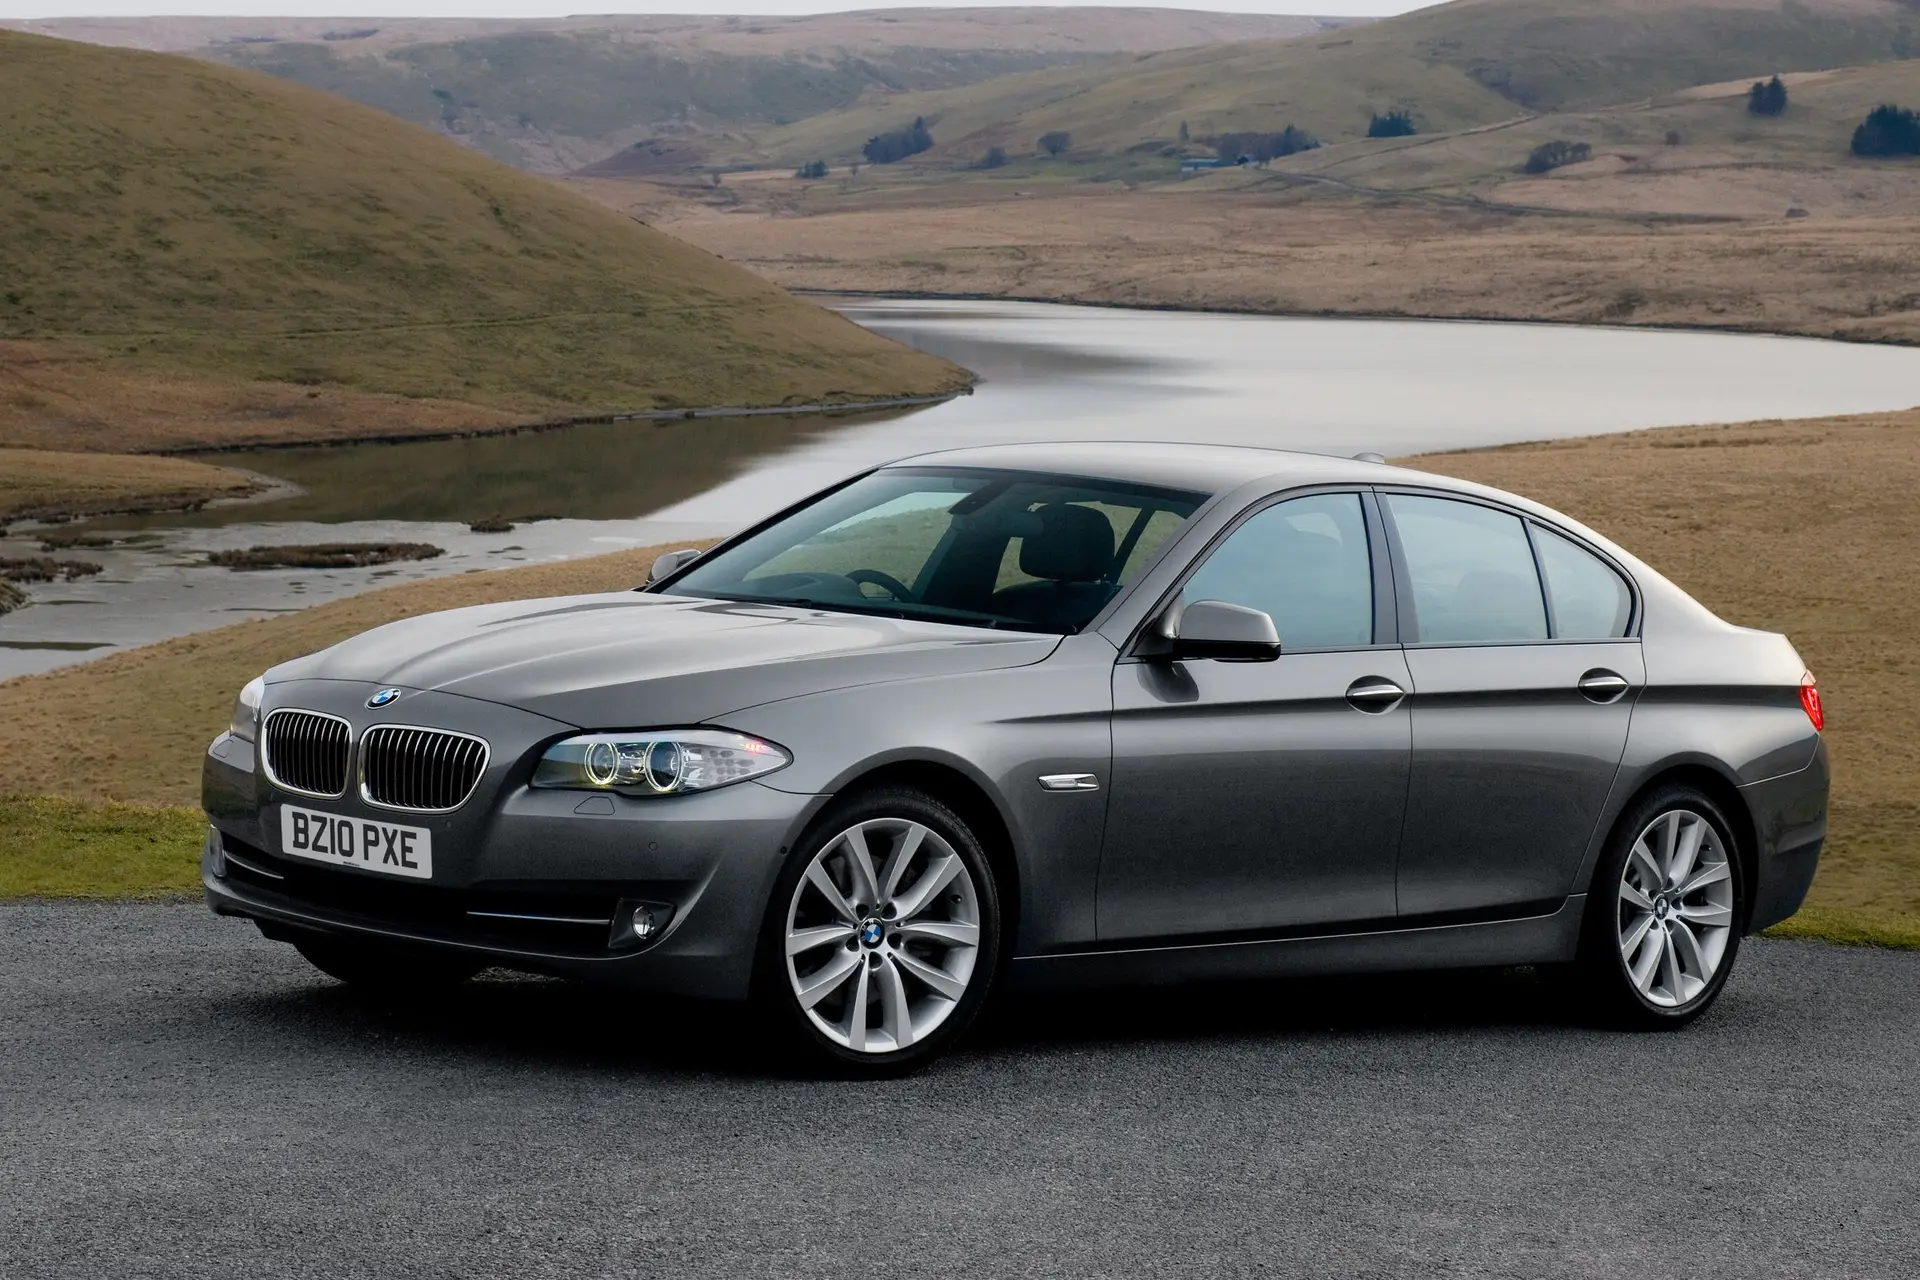 BMW 5 Series (2010-2017) Review: Exterior front three quarter photo of the BMW 5 Series